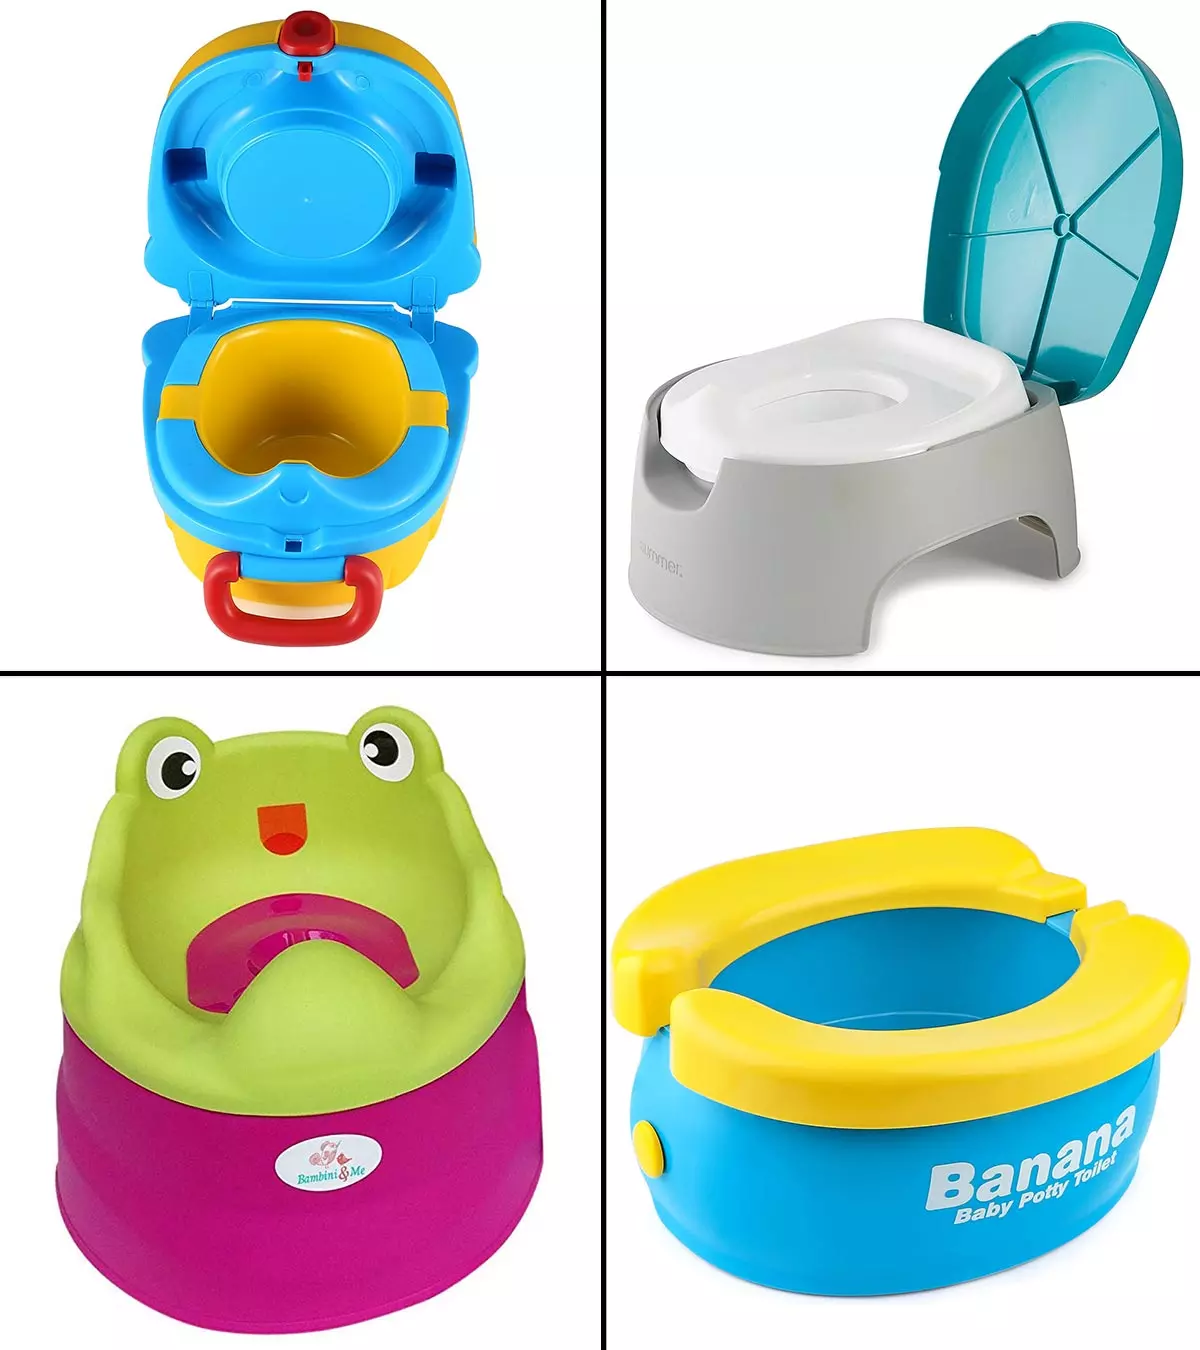 These portable and easy-to-use travel potties make outings with your toddlers stress-free.